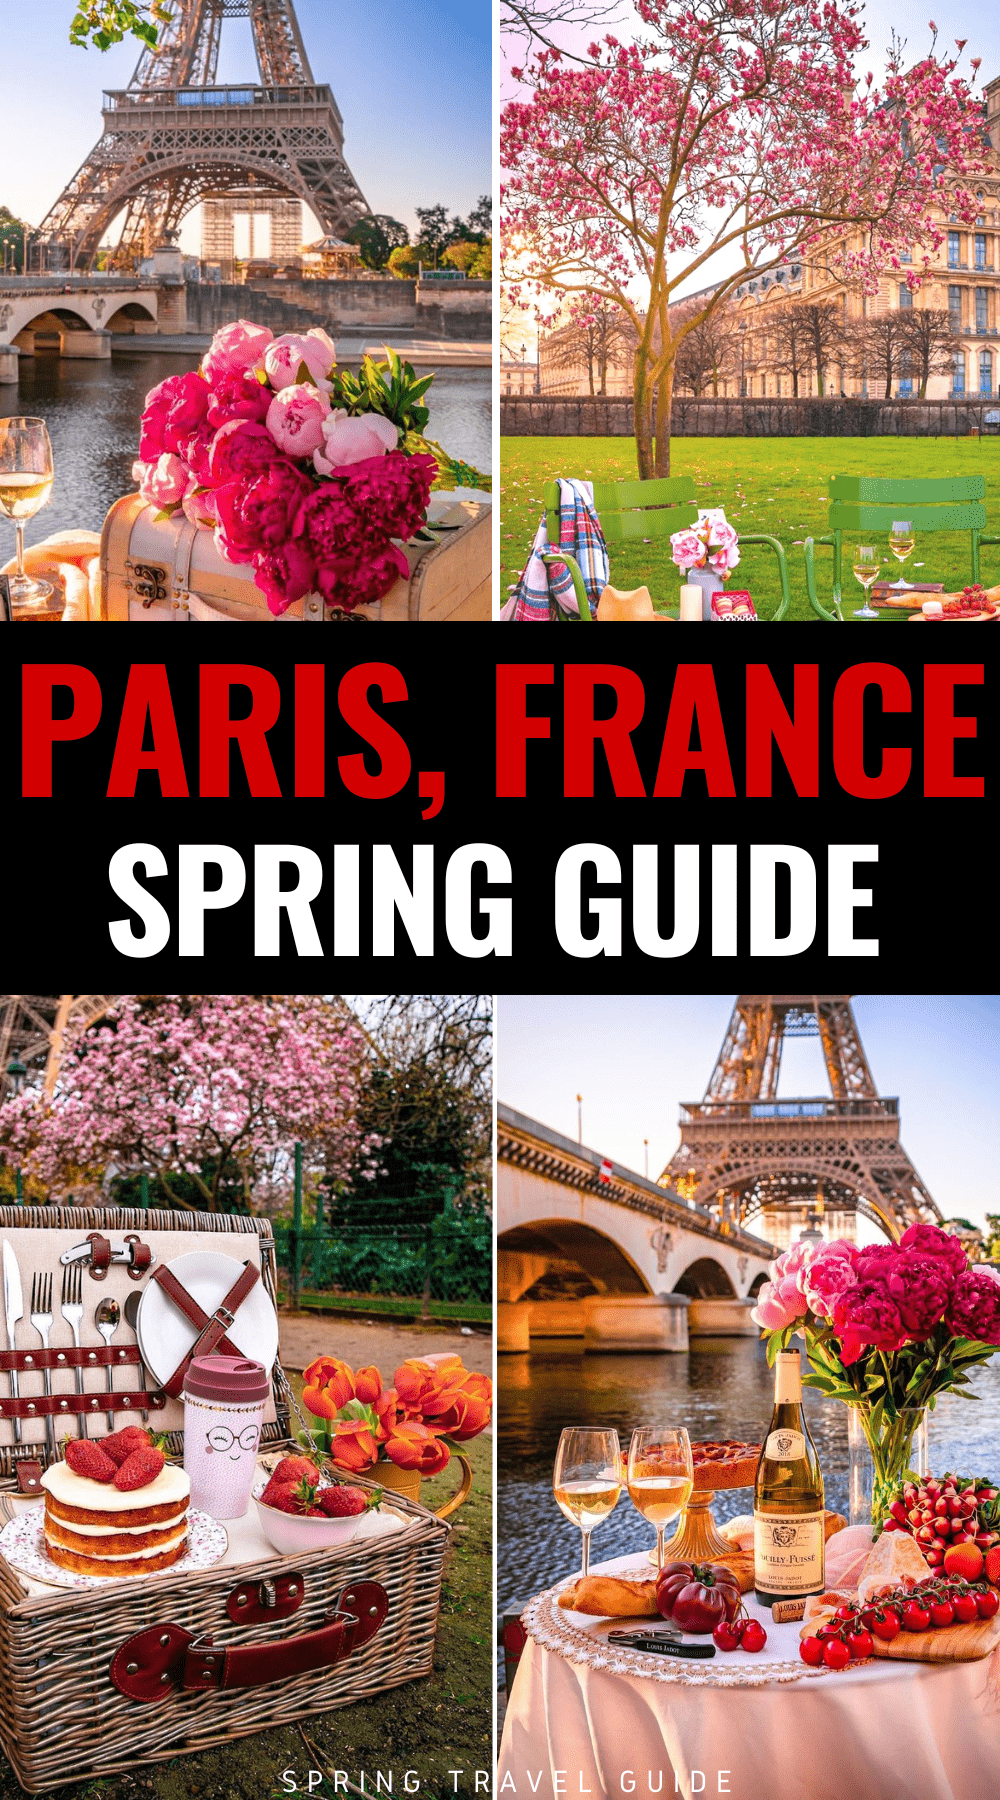 Paris in the Spring, 10 things to do in Paris in the Springtime